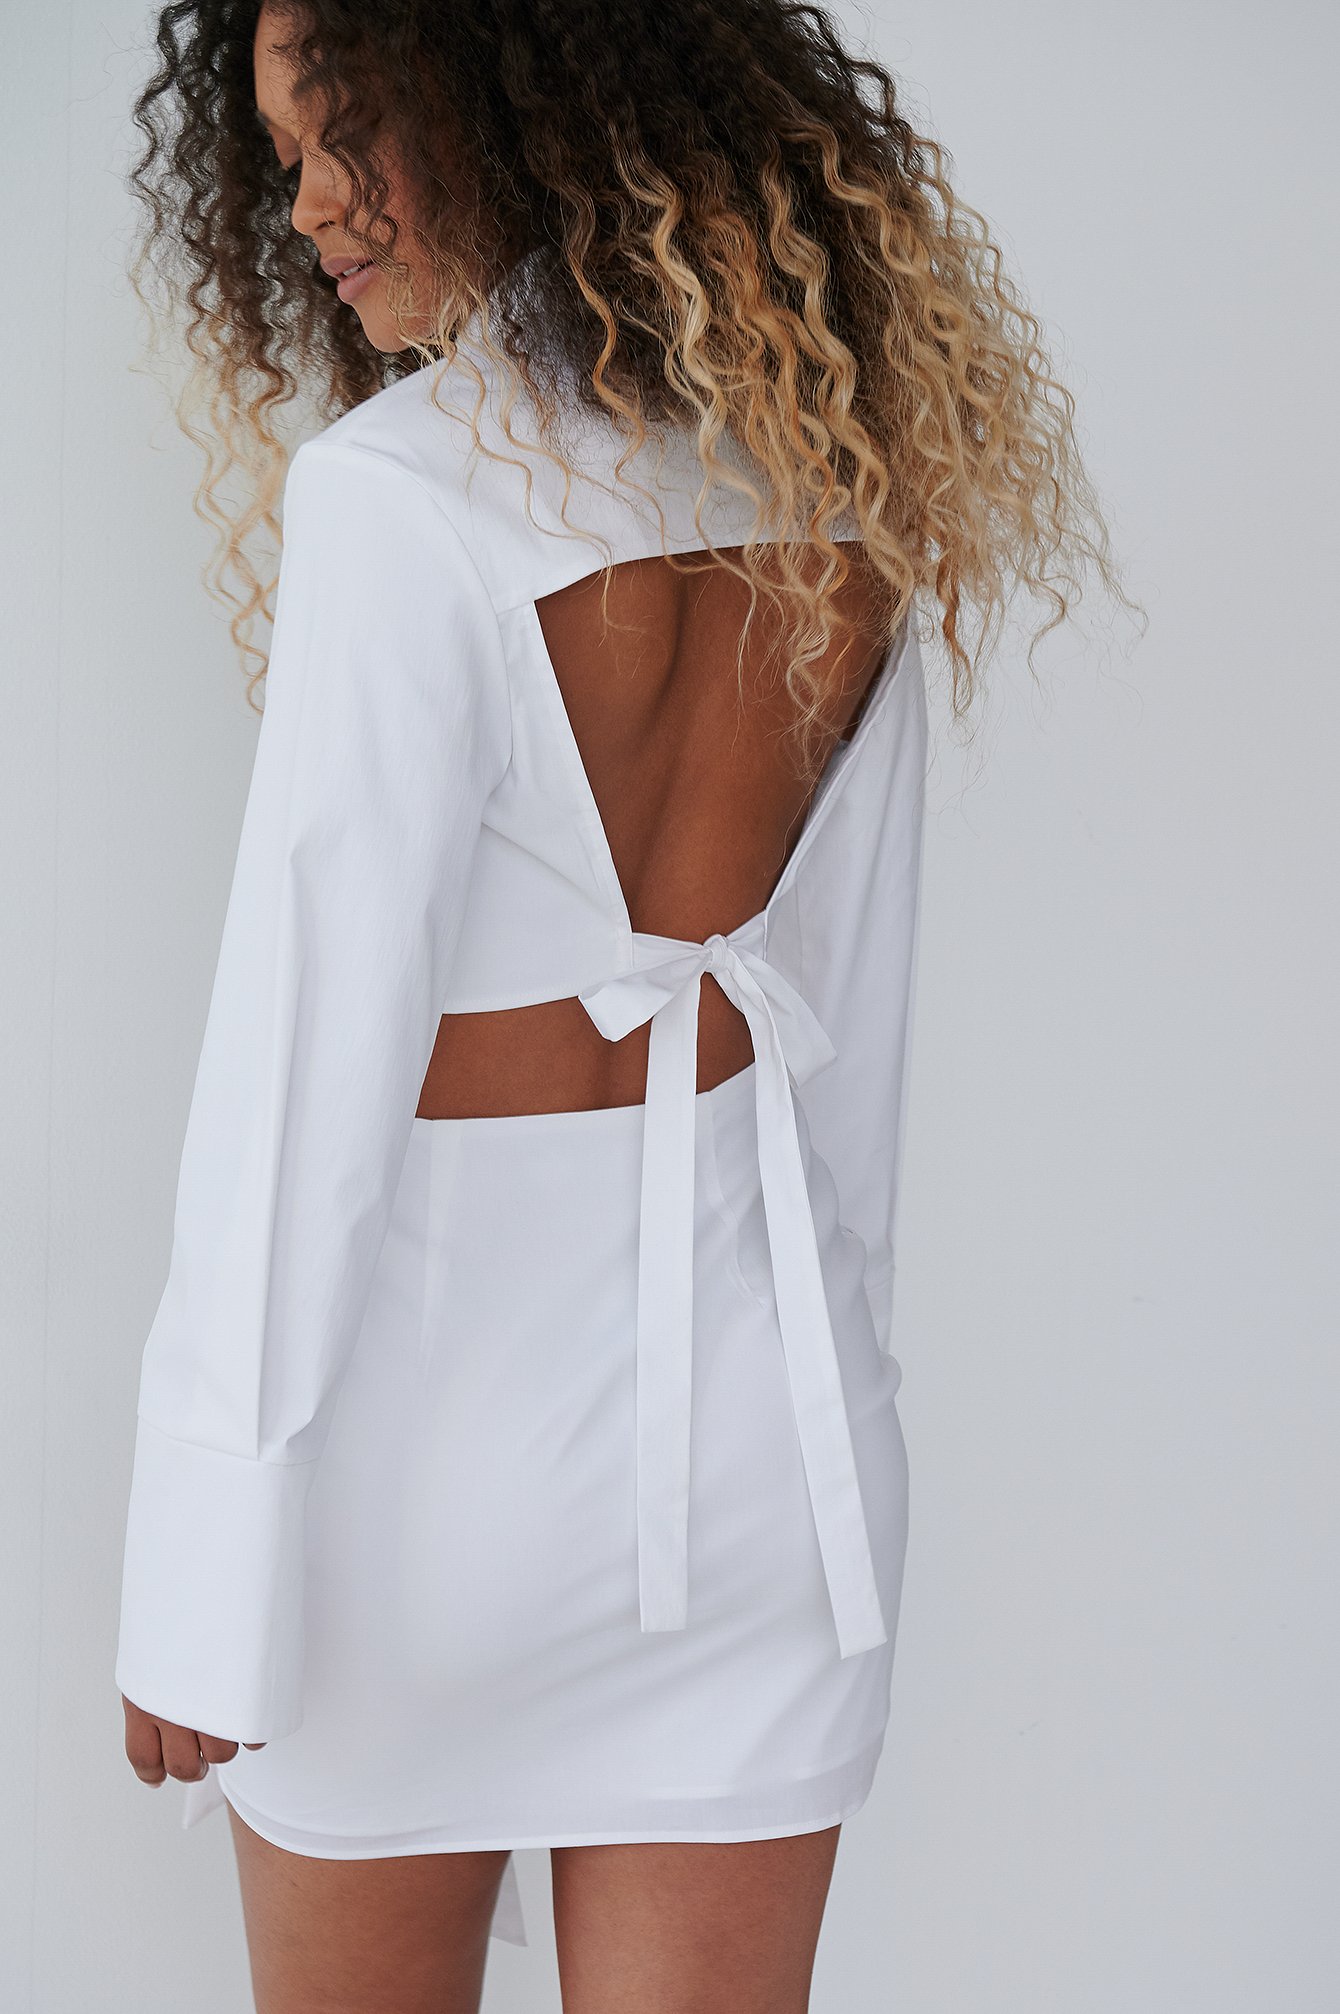 Angelica Blick X Na-kd Cropped Open Back Shirt - White